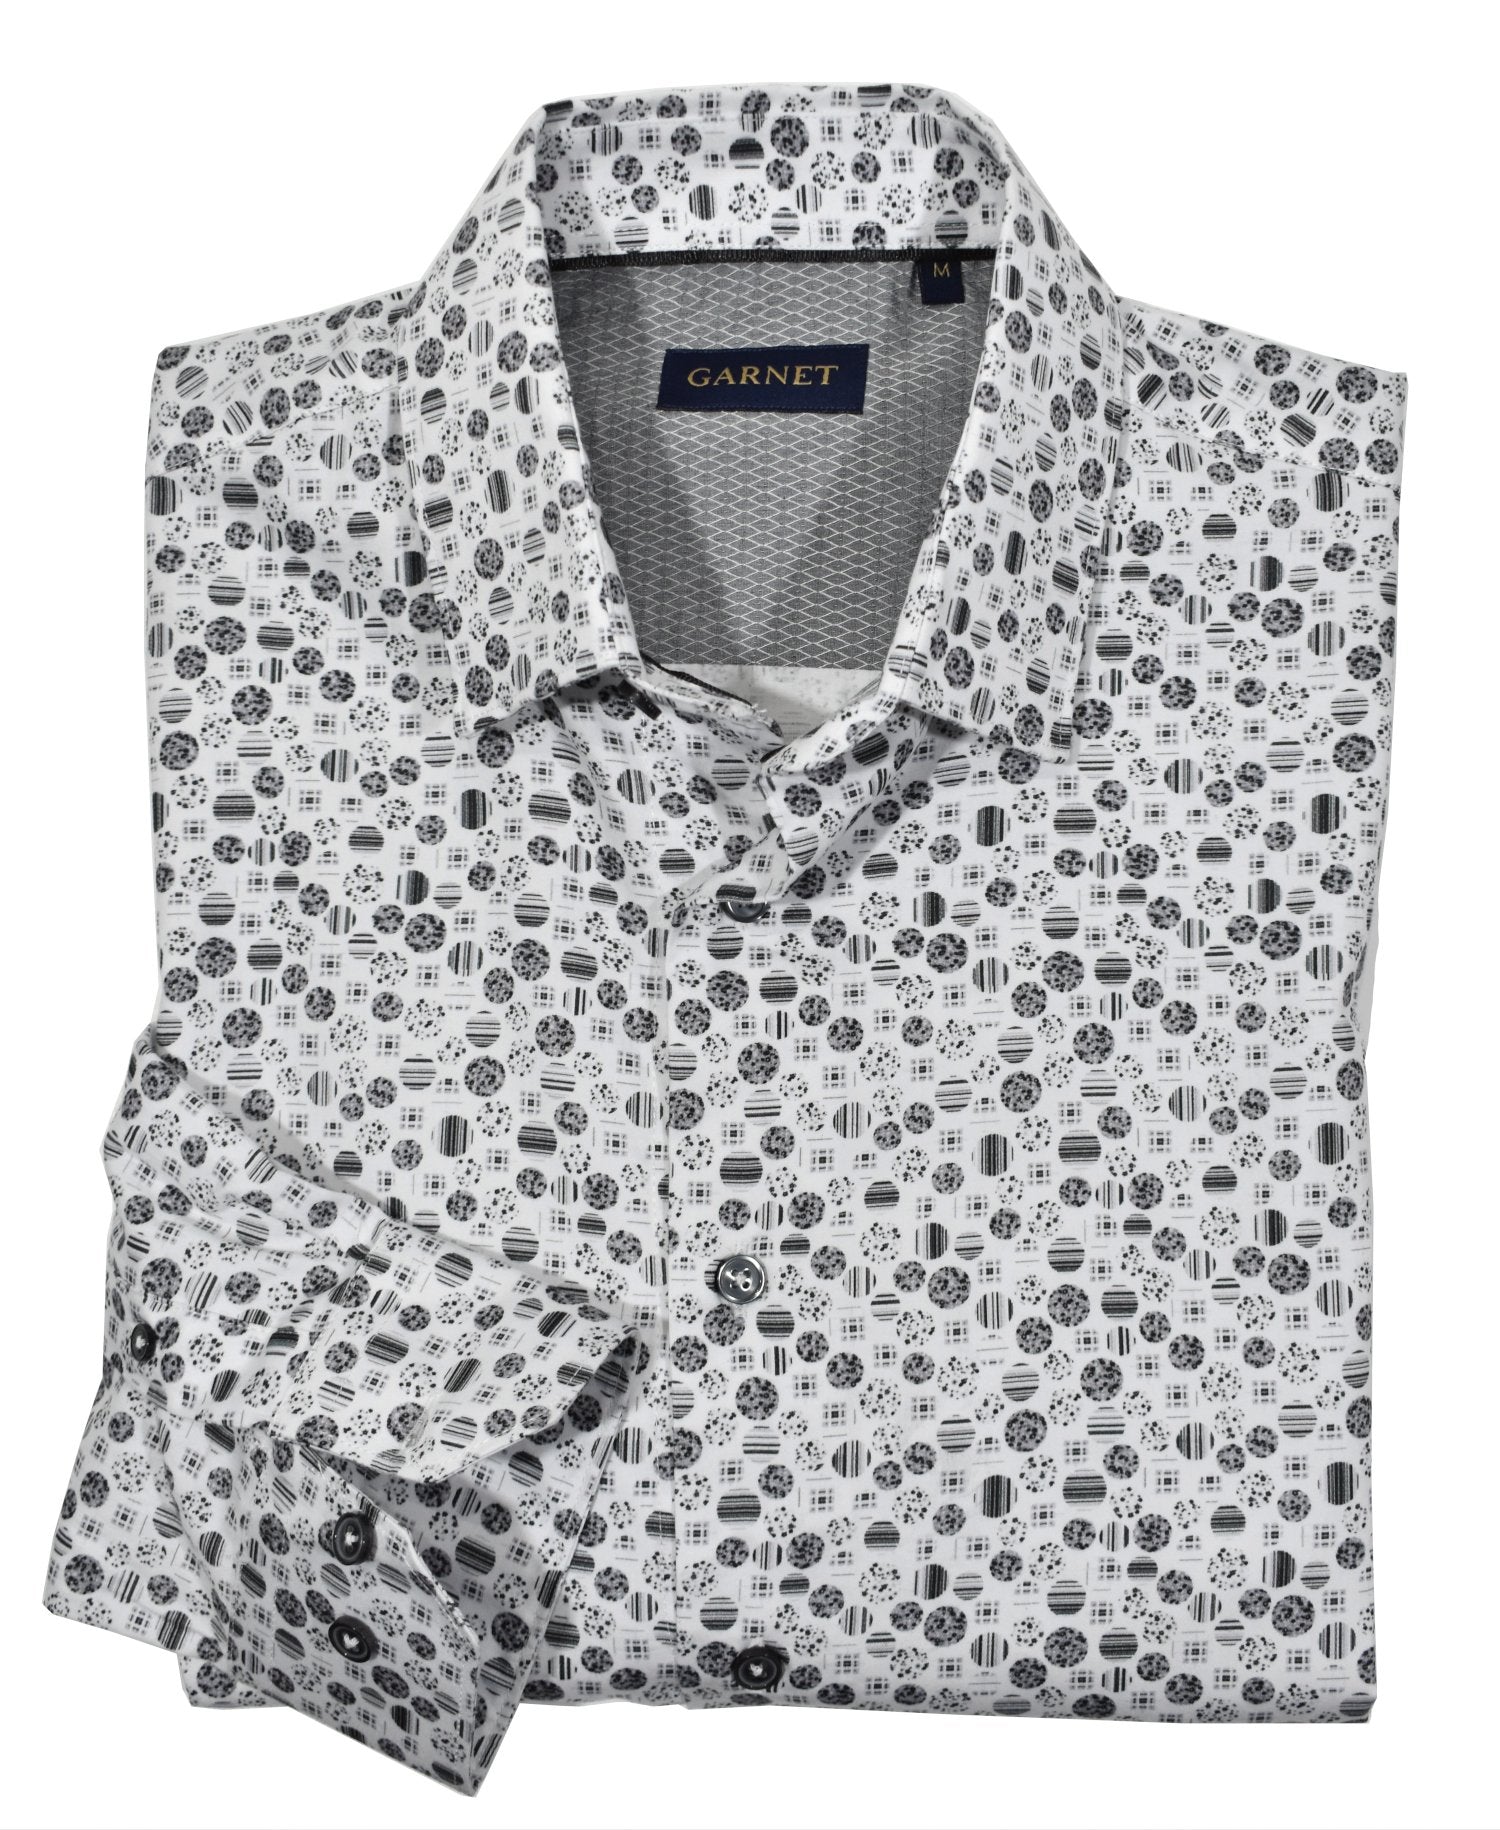 Transform your wardrobe with the dynamic ZA1038 Celestial Matter shirt. Featuring an eye-catching geometric print and an elegant blend of white, gray, charcoal and black, this shirt adds a touch of distinction to any outfit. Crafted from luxurious soft cotton, with a medium collar and classic shaped fit, this stylish piece will take you from day to night in effortless style.